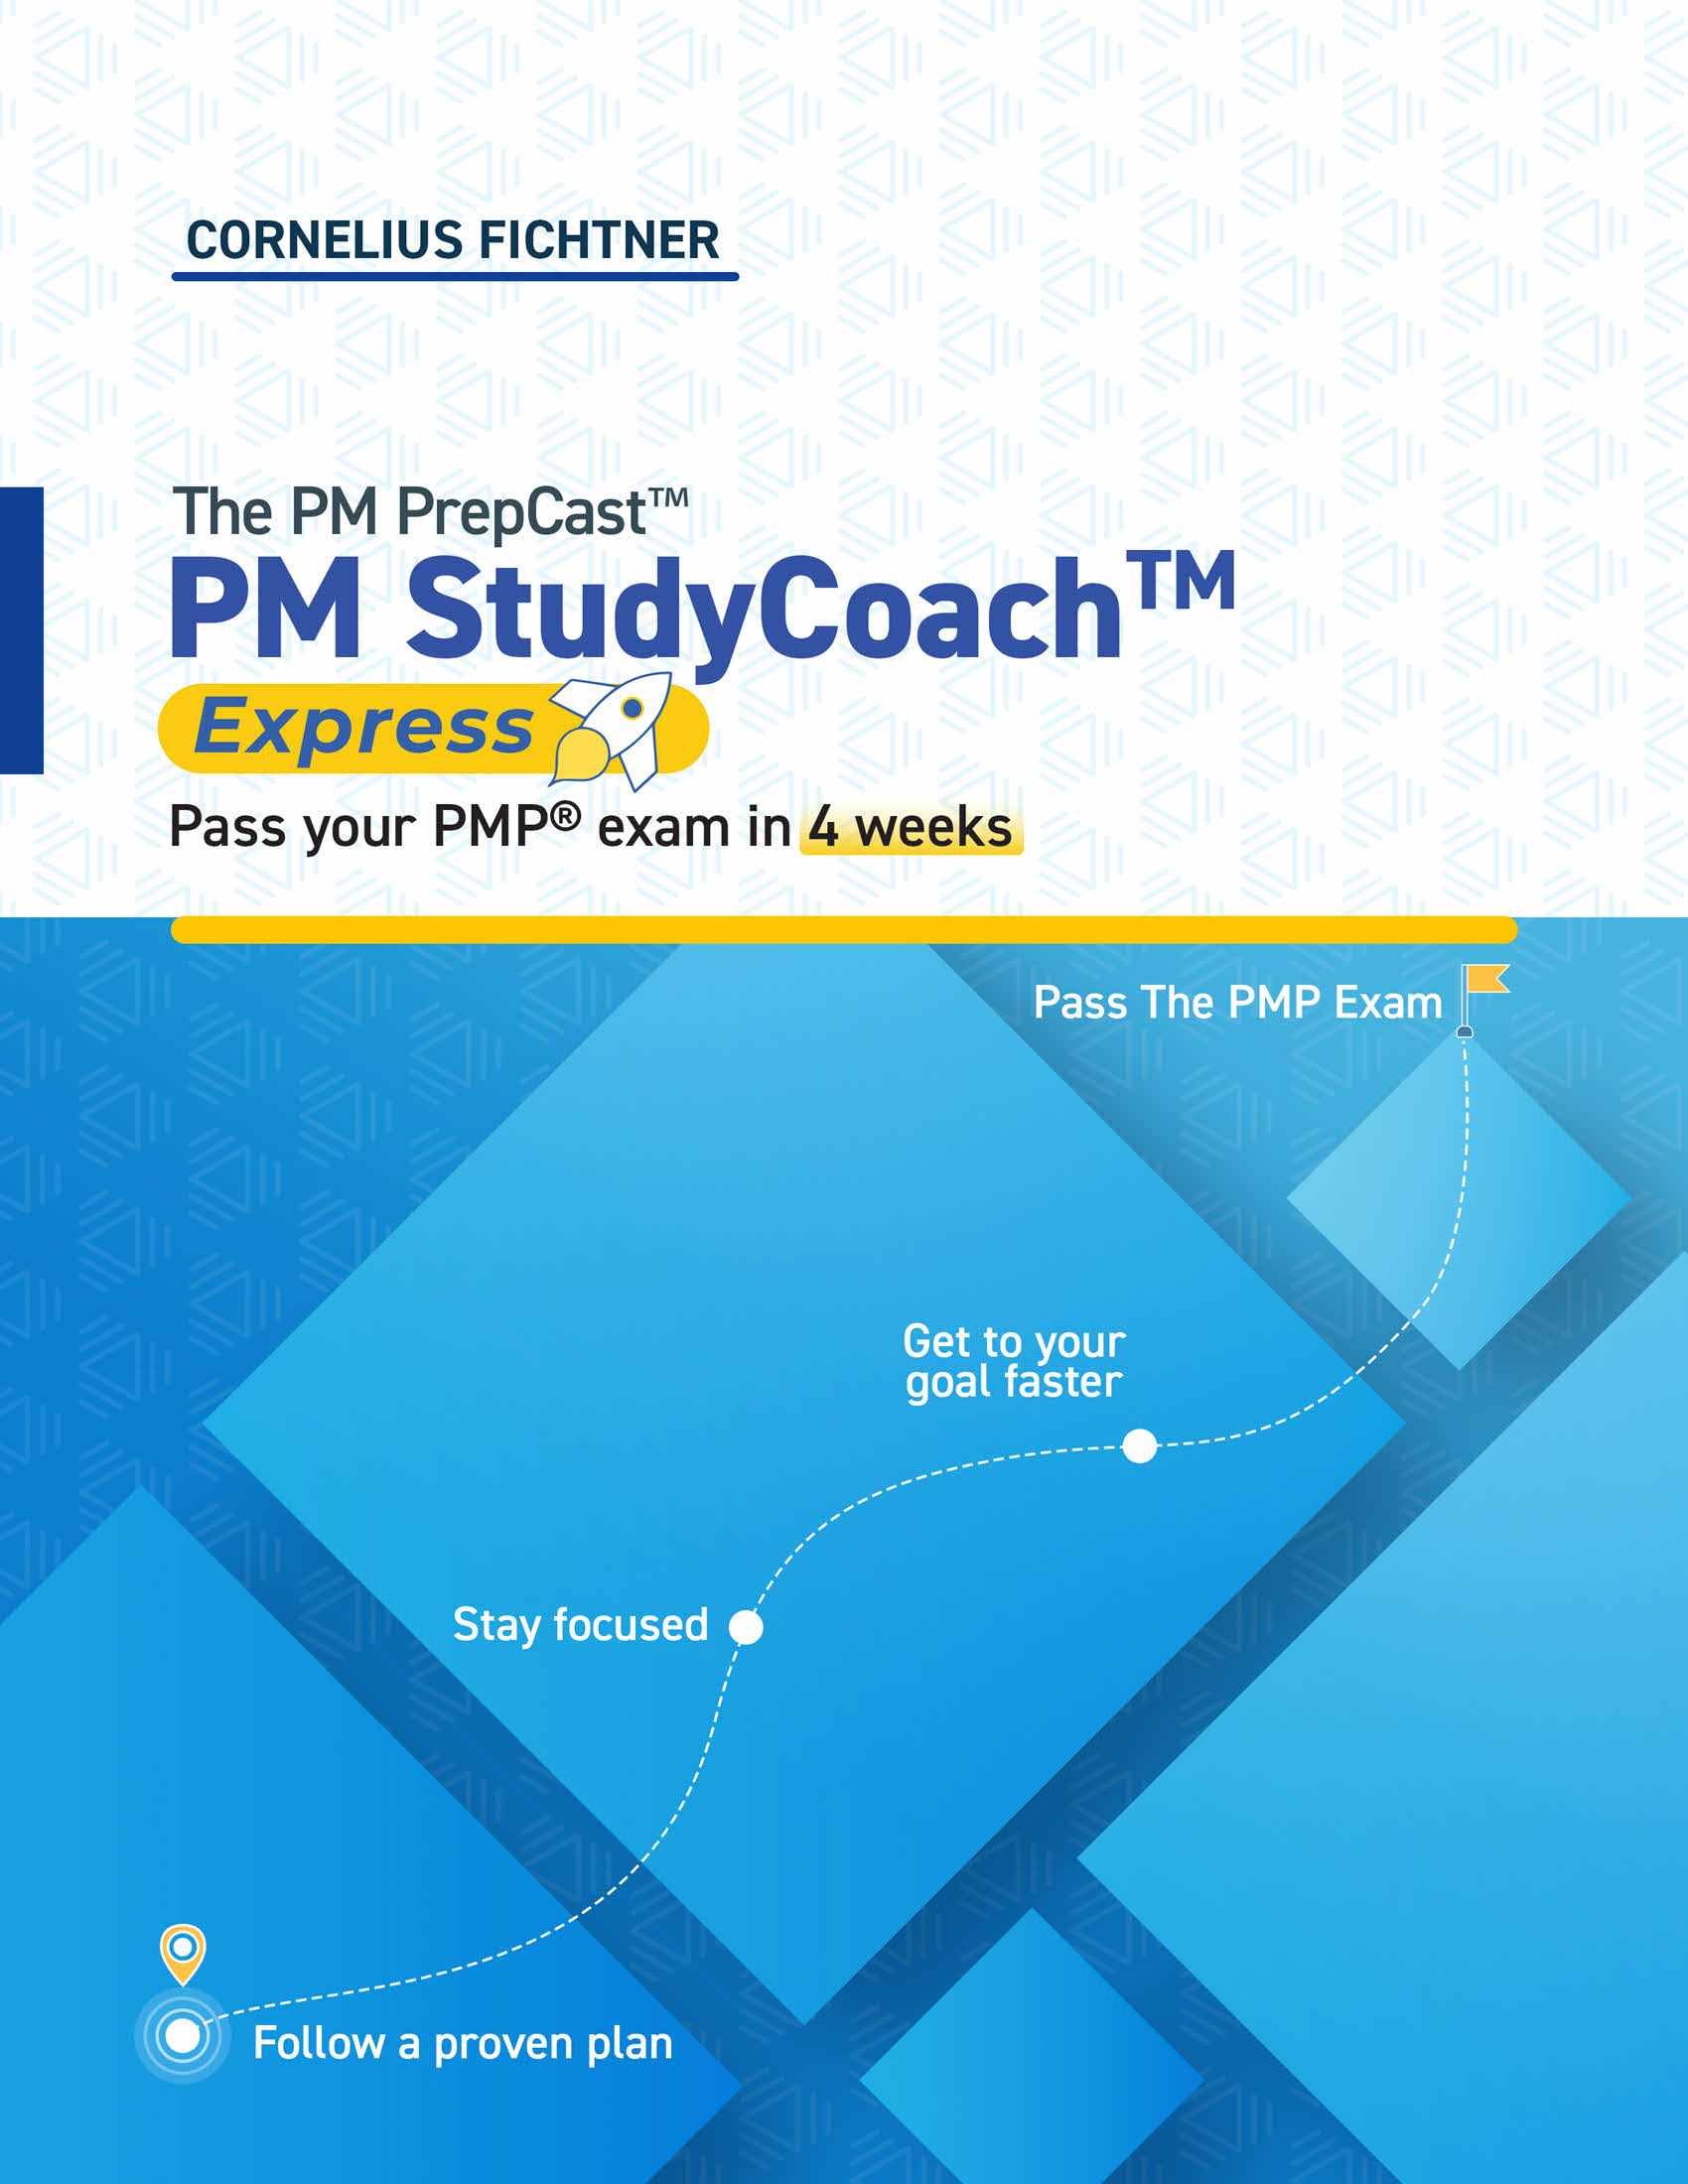 PM StudyCoach Guidebook Express Page